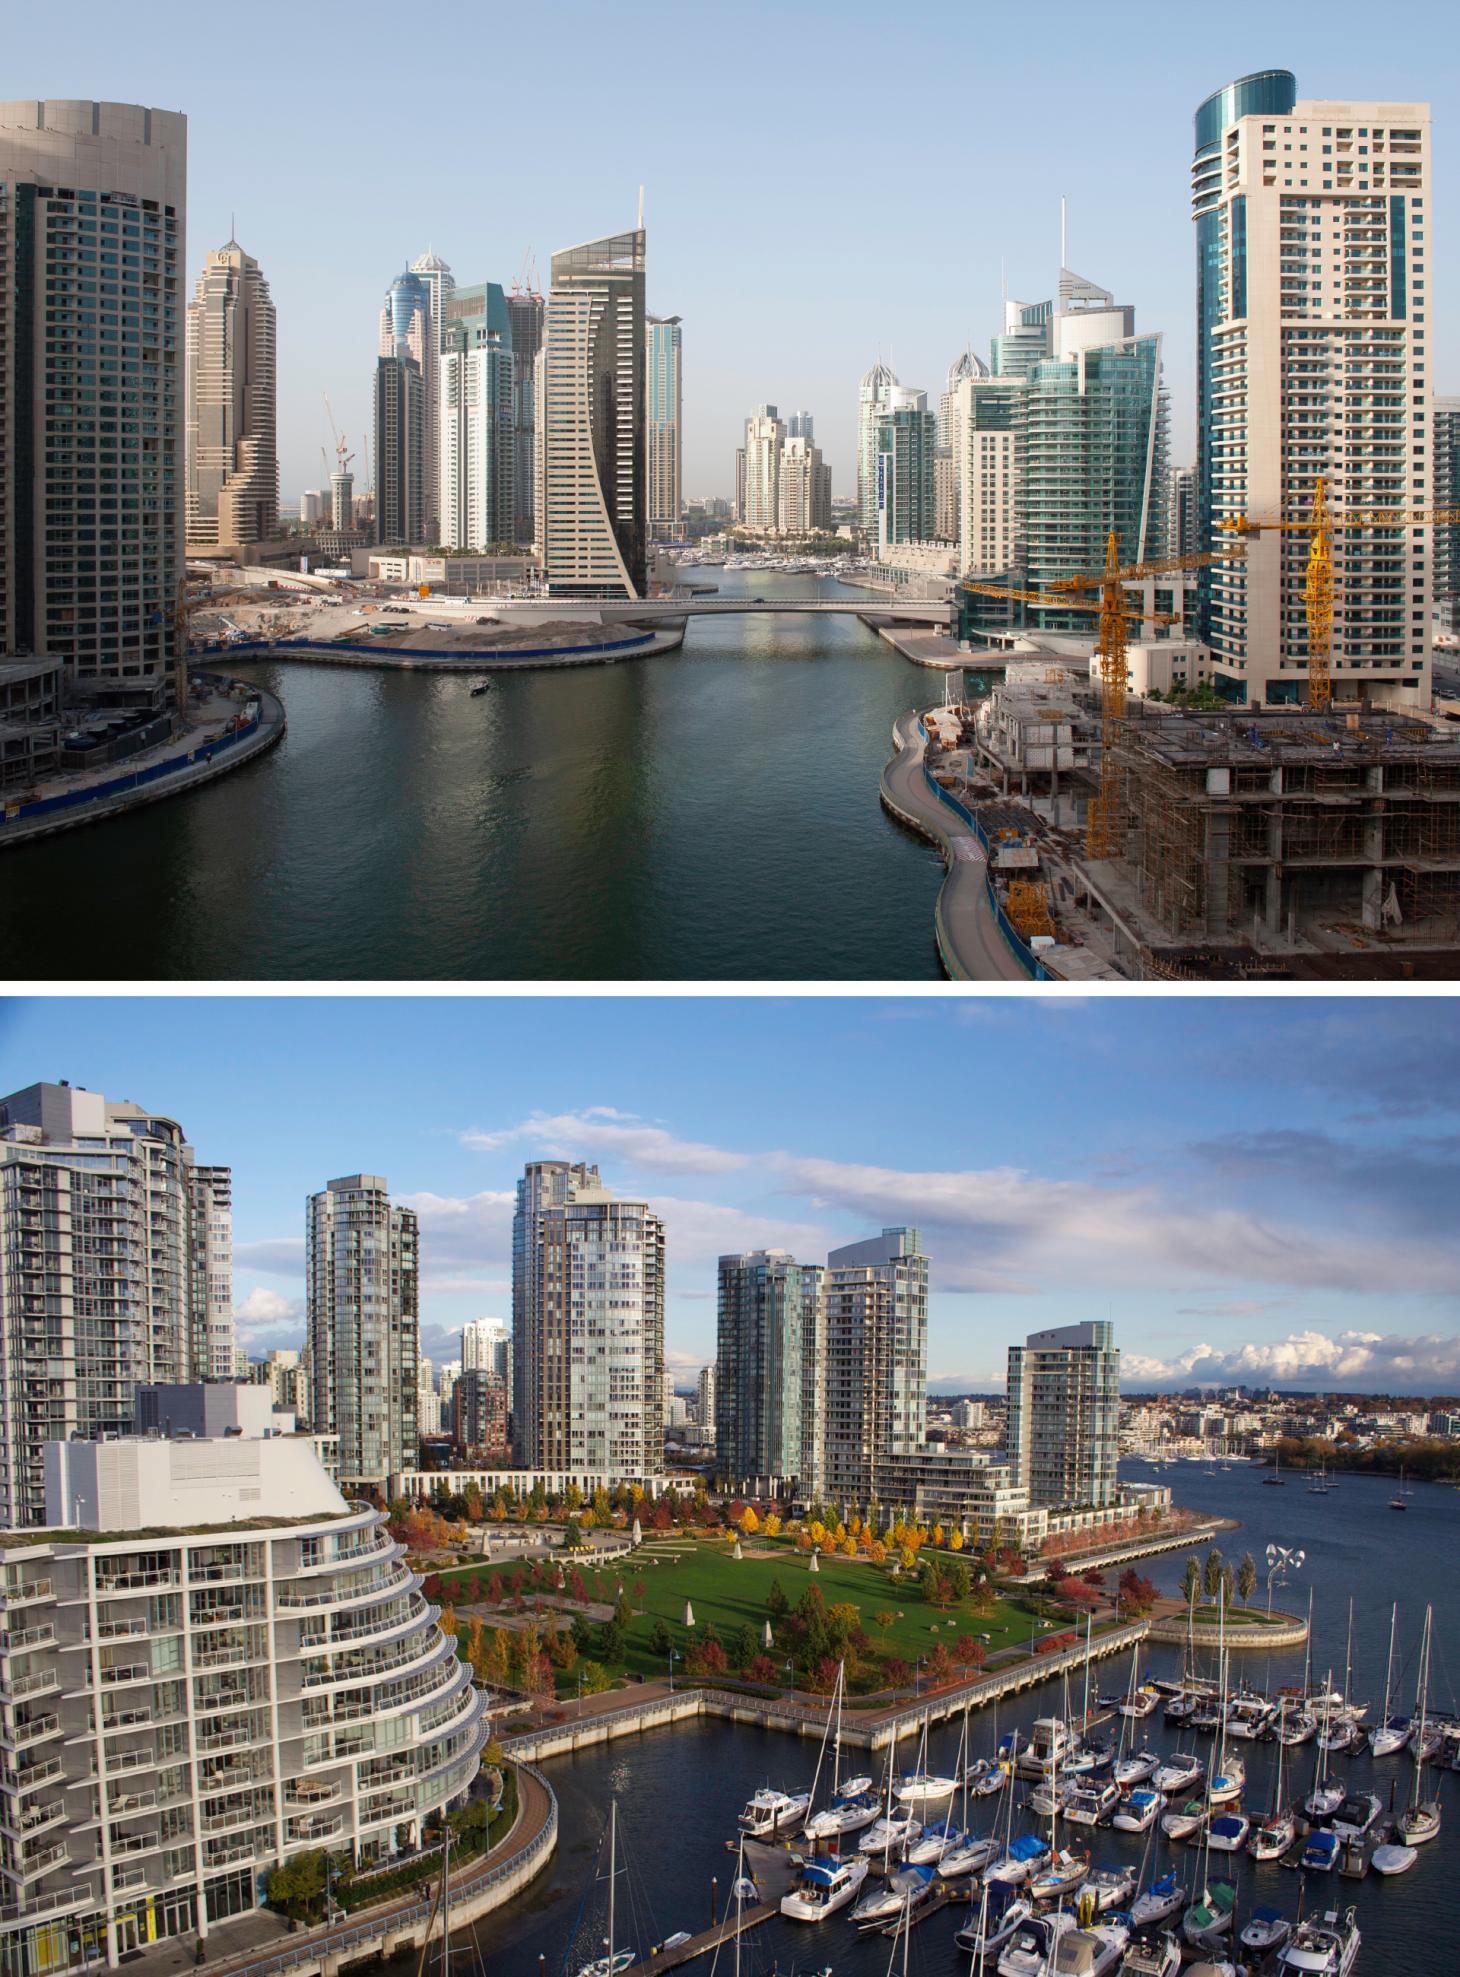 An aerial view of the Dubai Marina side by side with an aerial view of Vancouver’s Yaletown waterfront